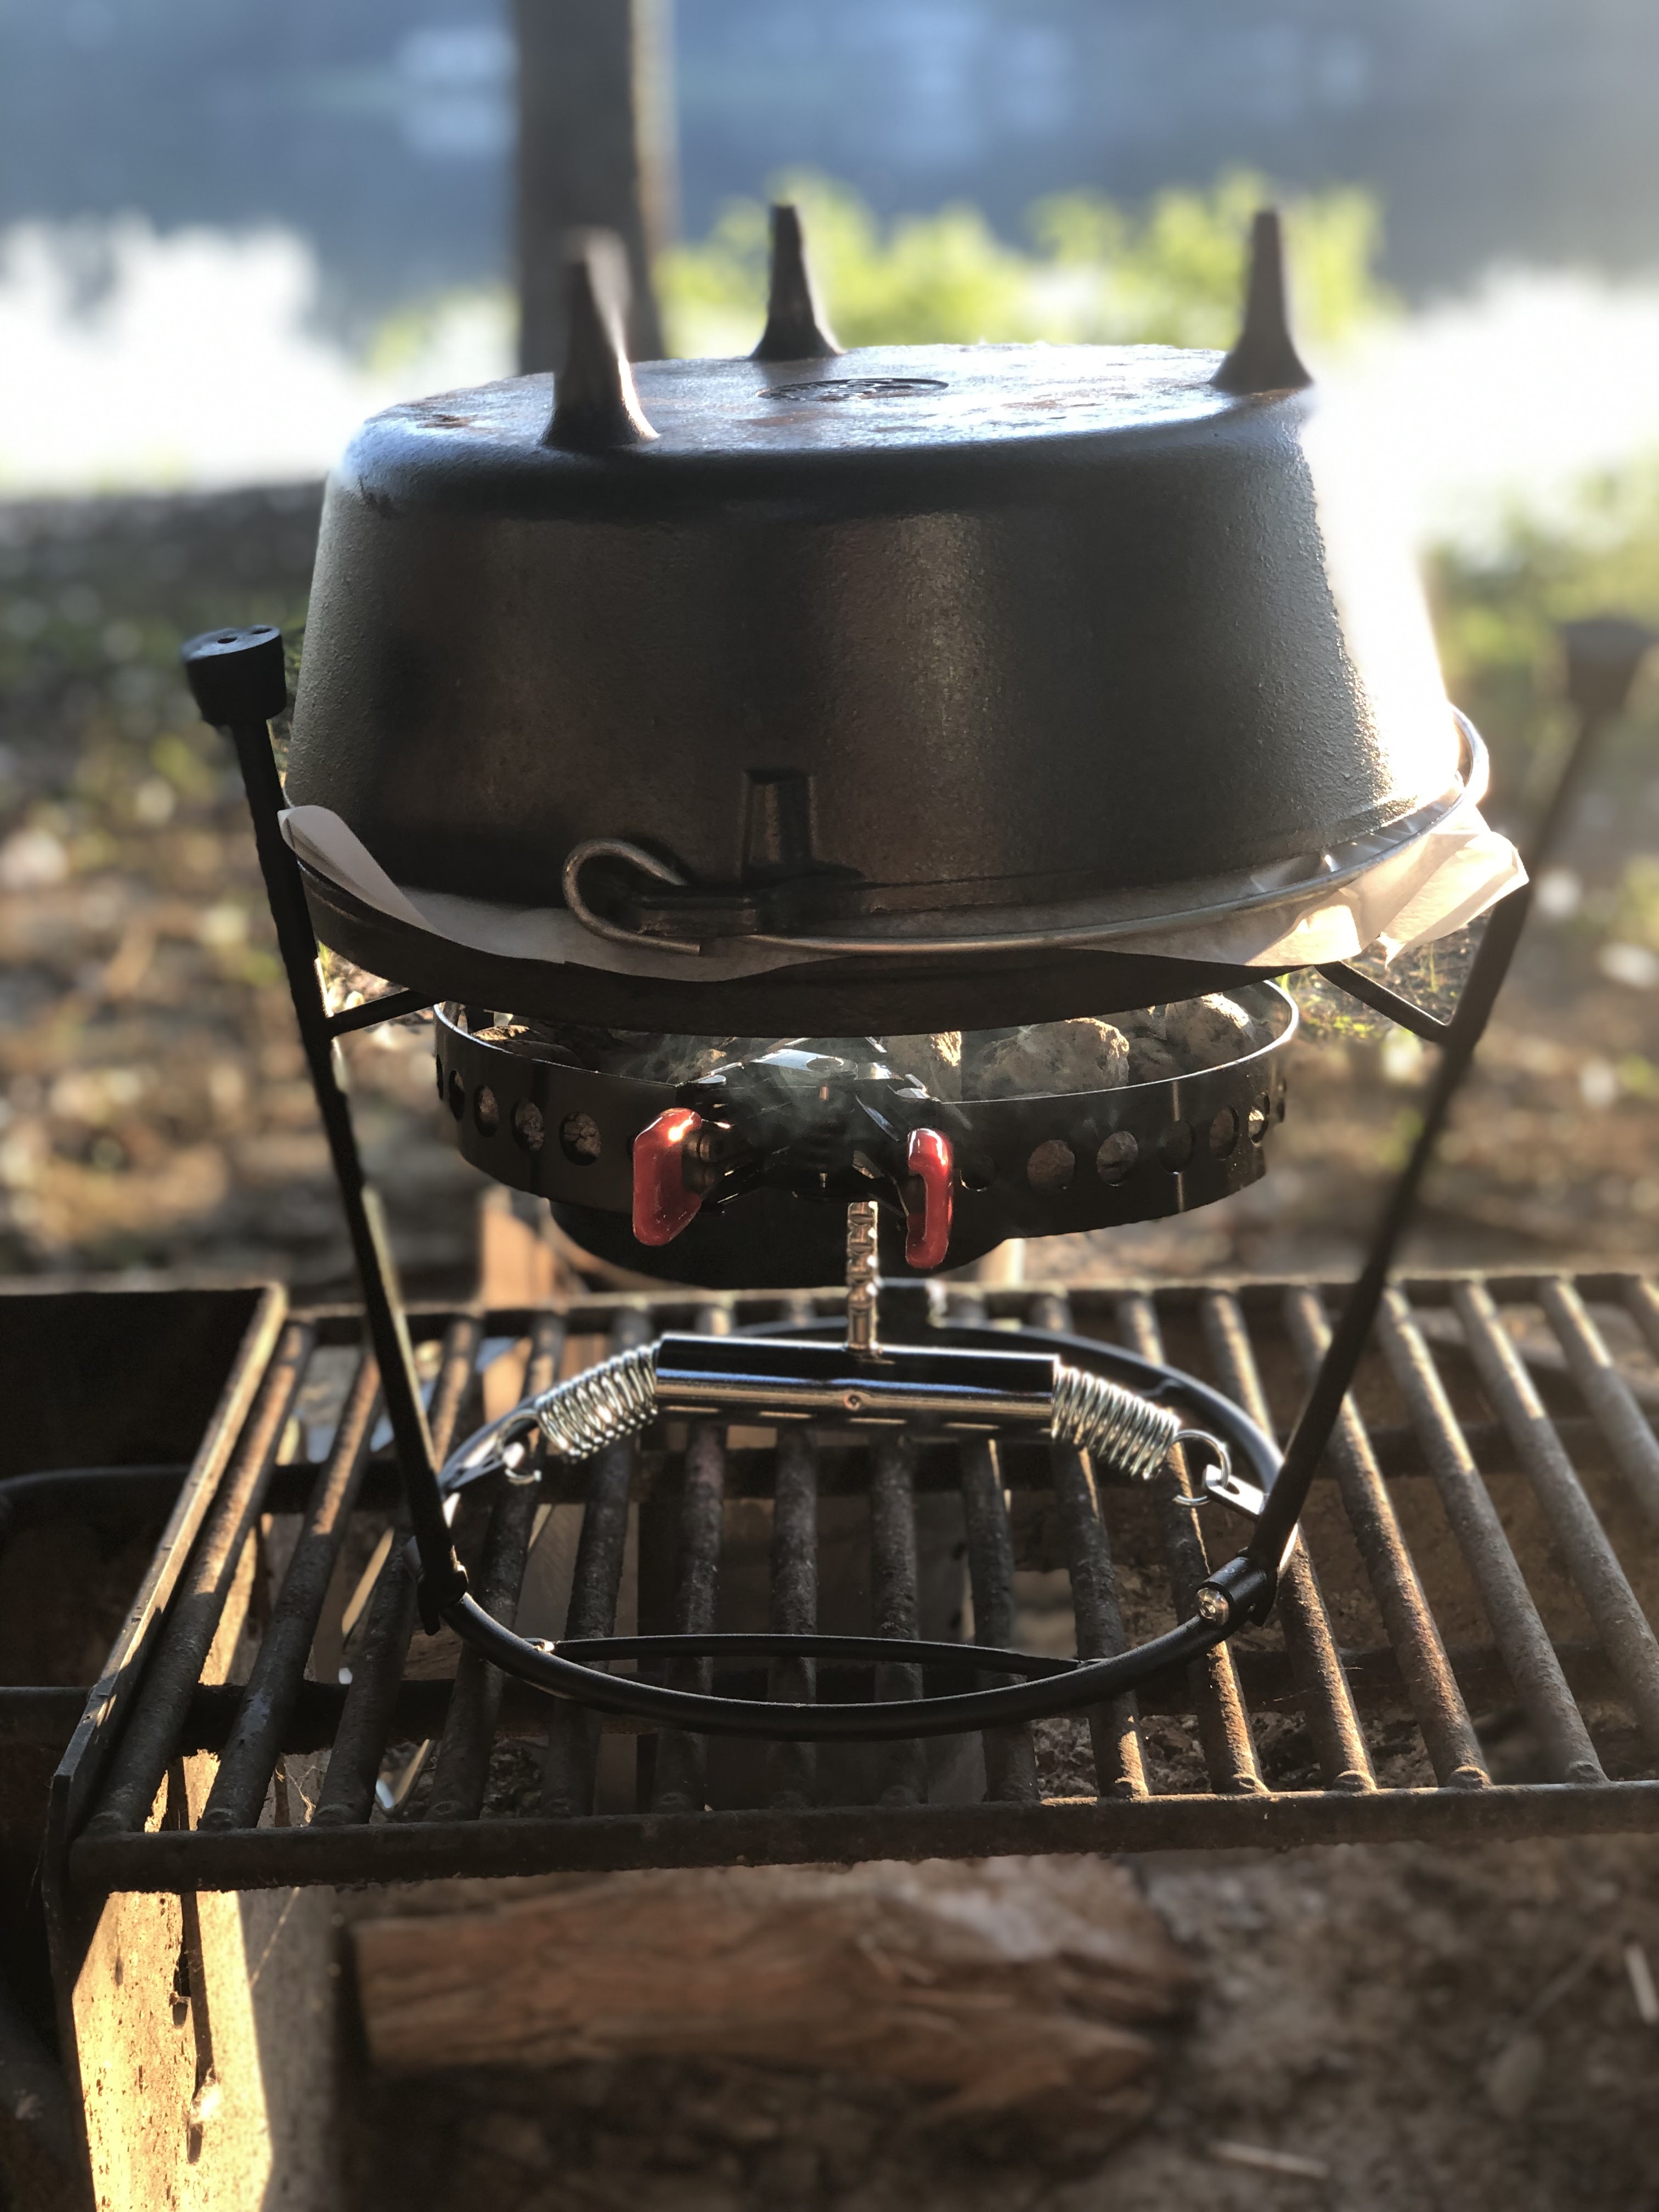 1 Campfire Cooking Kit Essential – Crisbee Cast Iron Seasoning